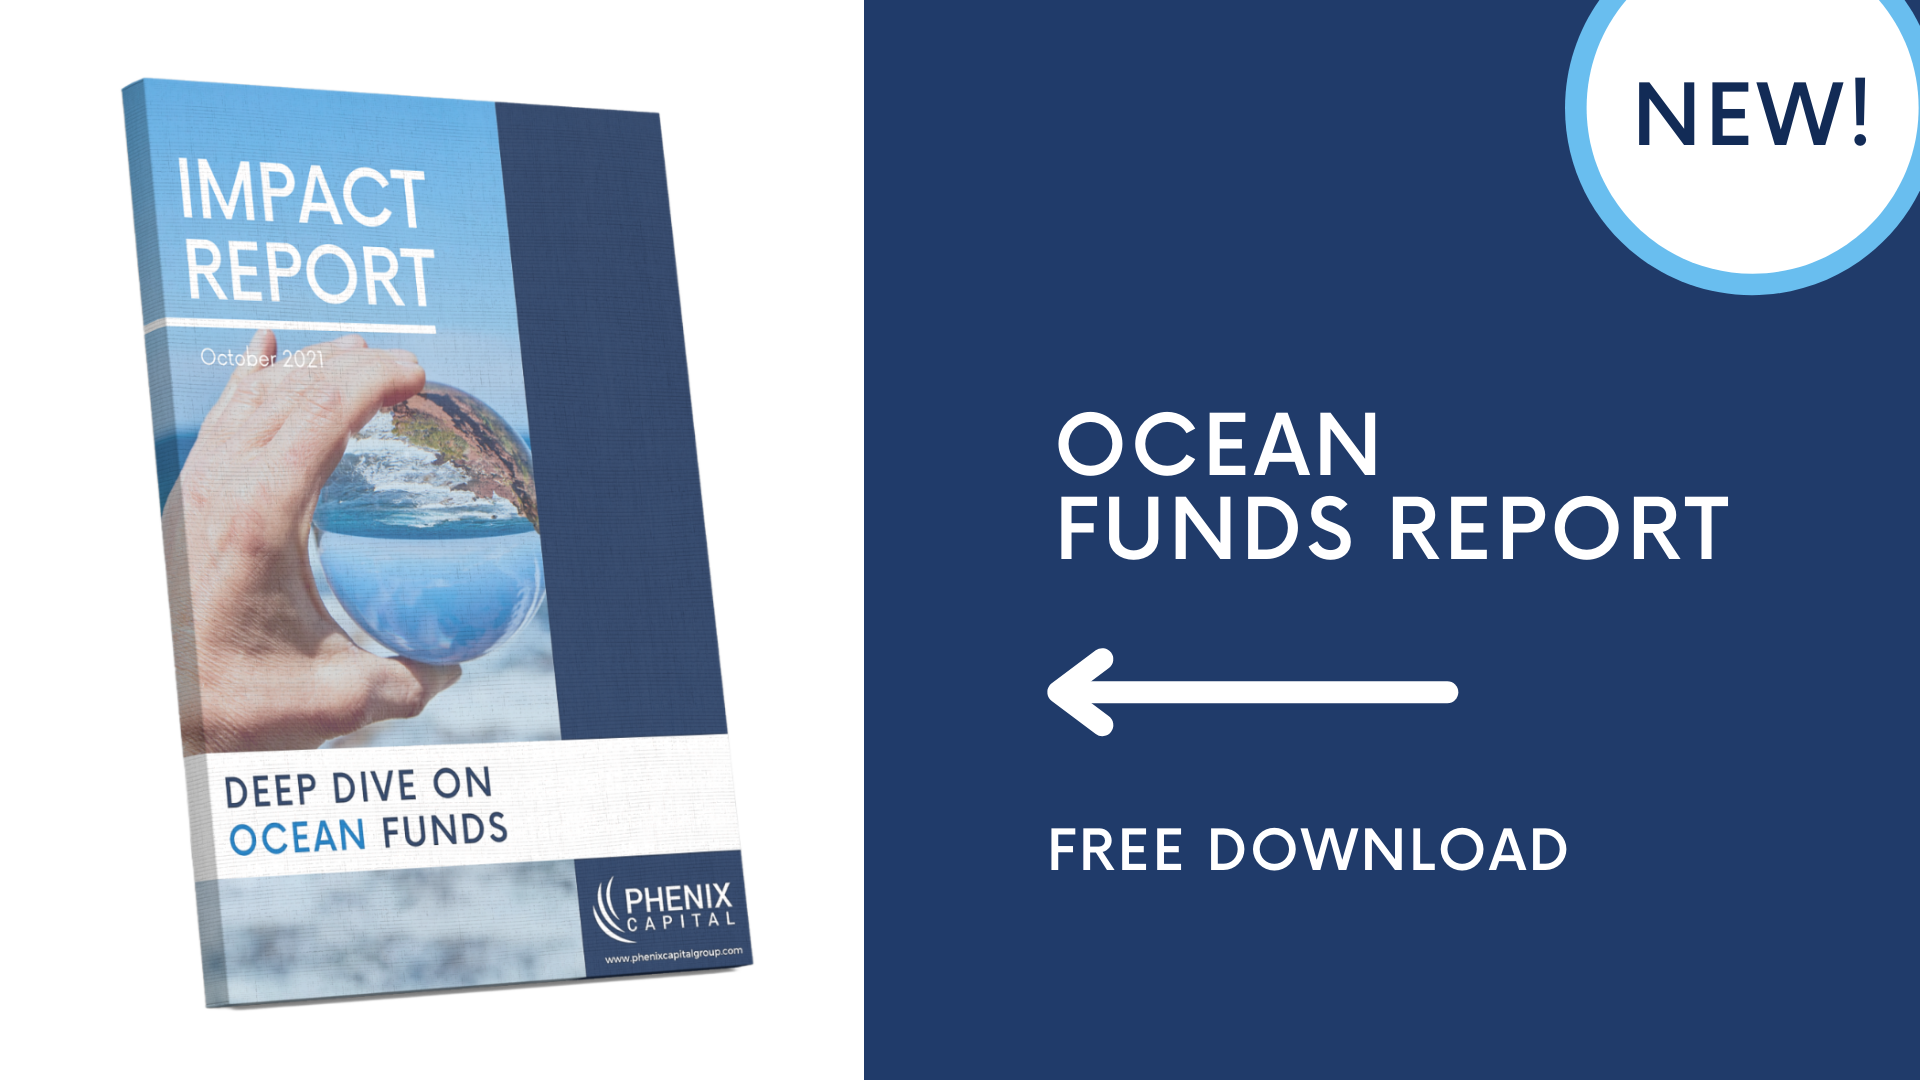 PRESS RELEASE: Impact Report shows the rising of investment strategies with a focus on the Ocean